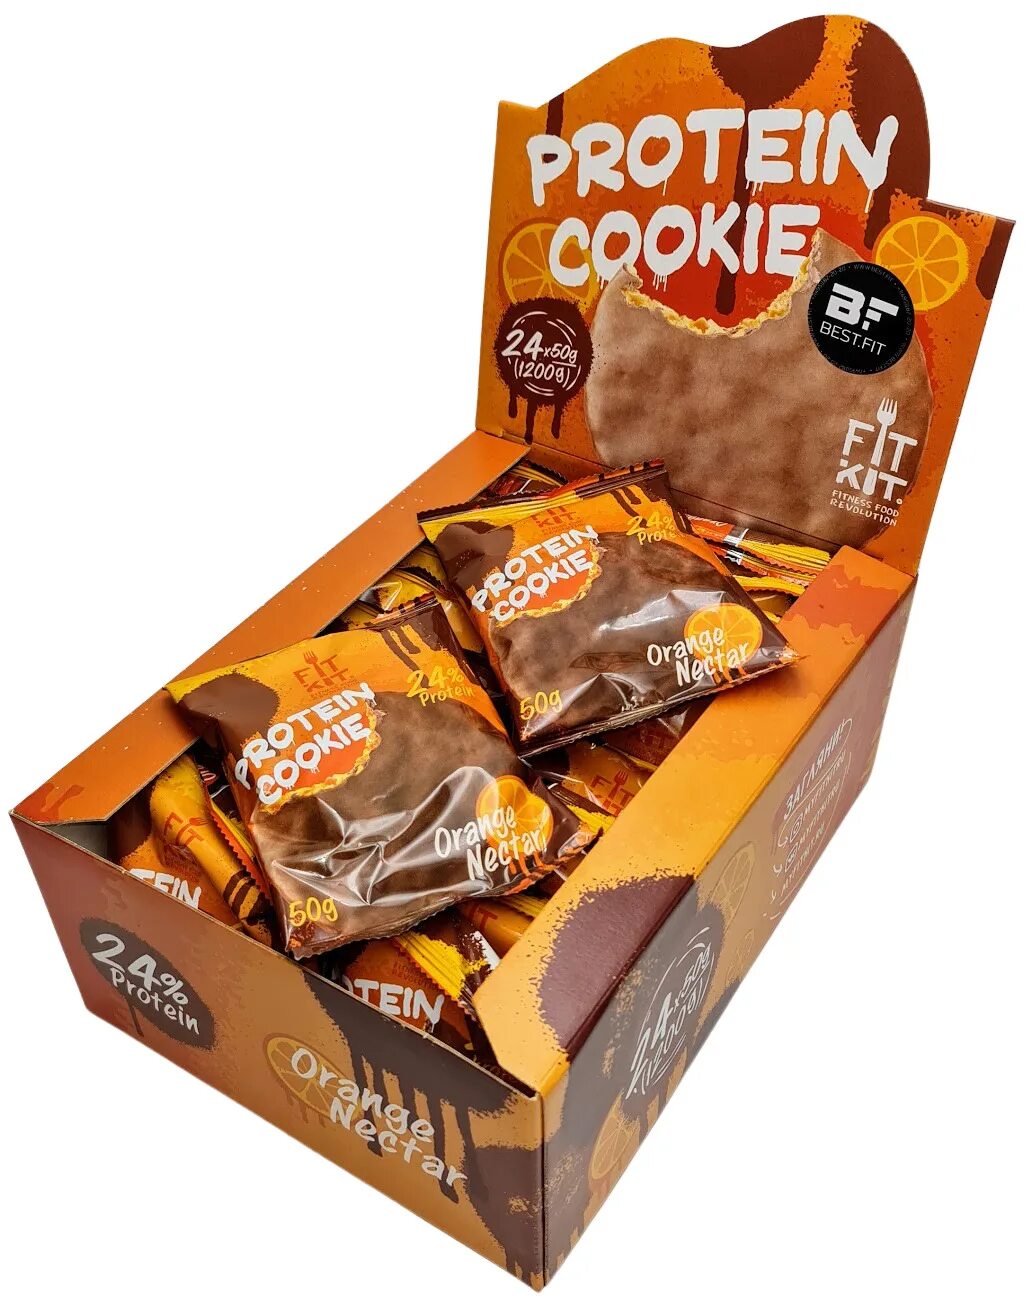 Fitkit. Fit Kit Choco Protein cookie. Fit Kit Chocolate Protein cookie 50 гр (24 шт.) - Апельсин. Протеиновое печенье фит кит. FK Protein Chocolate cookie (50гр.).